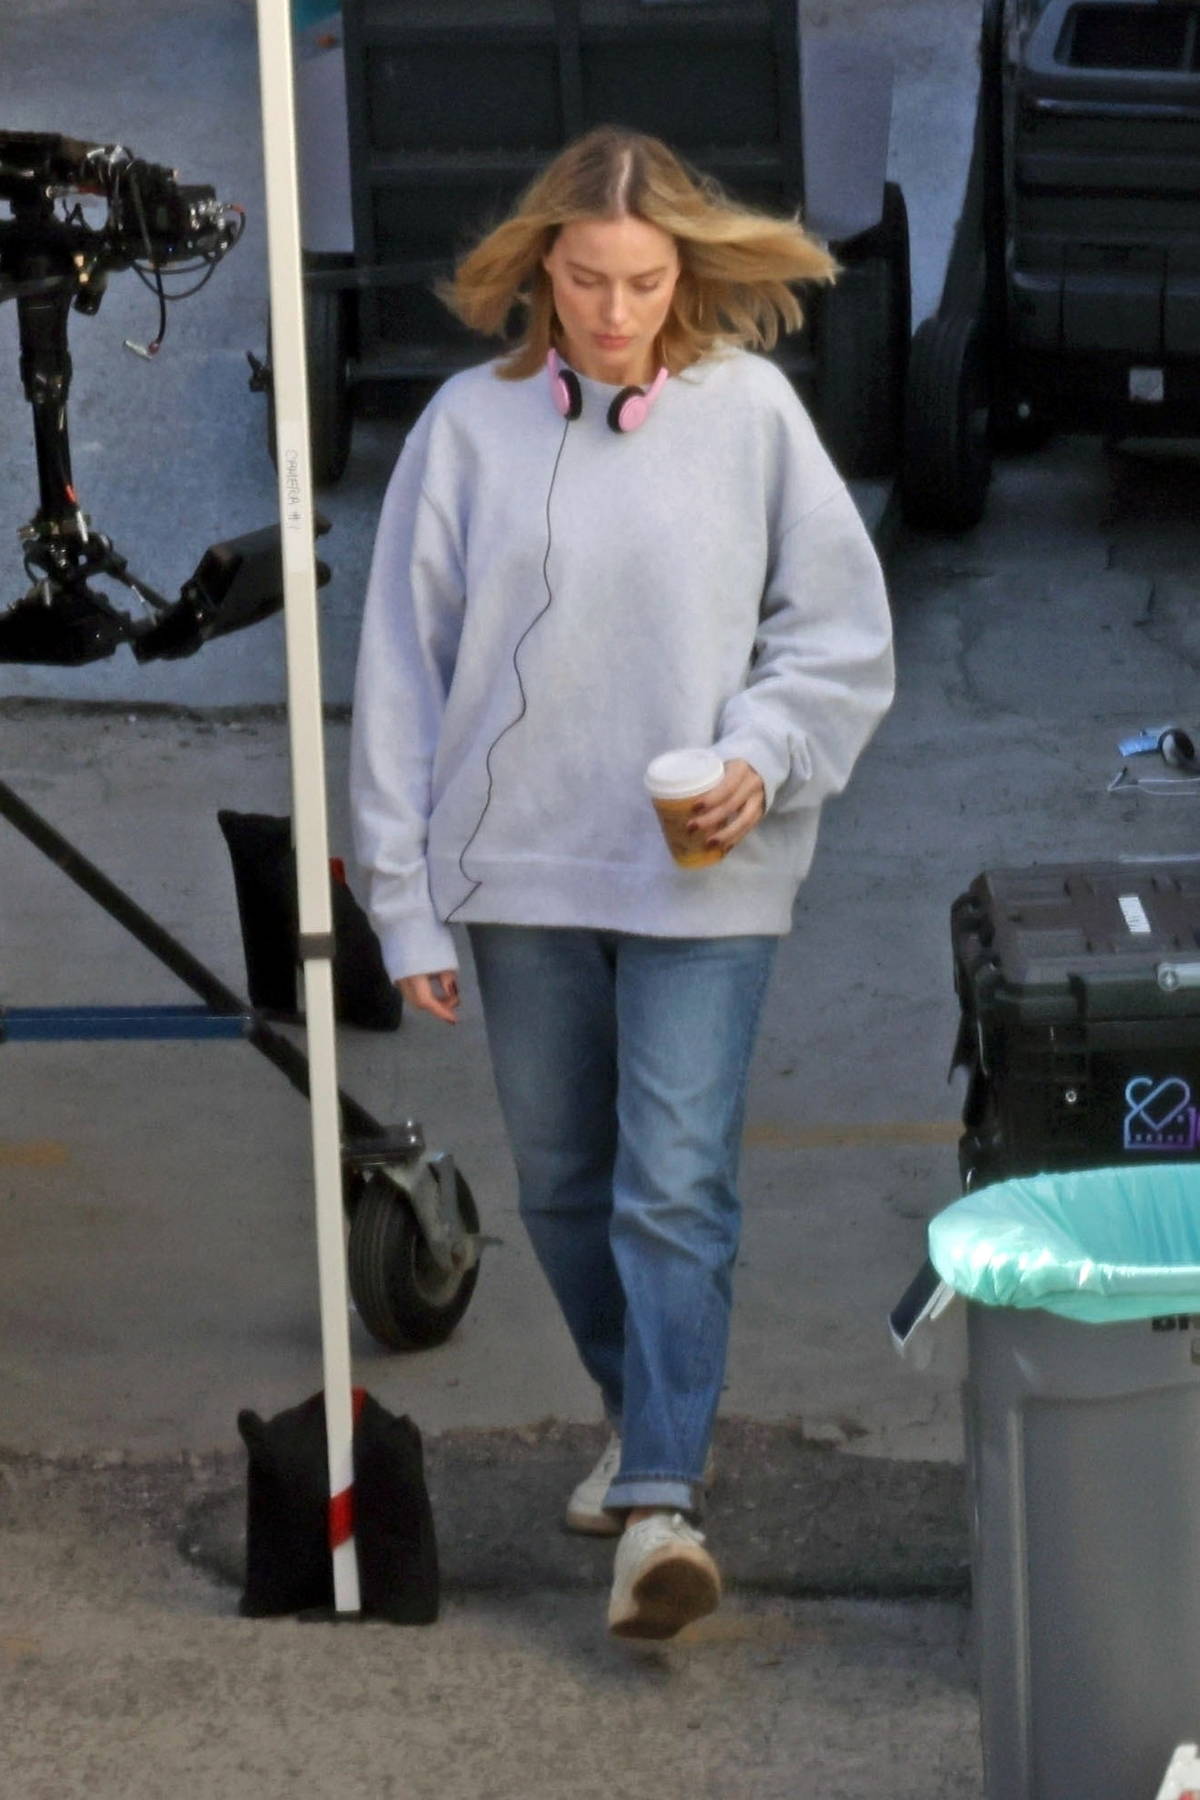 Margot-Robbie-spotted-while-filming-scenes-for-A-Big-Bold-Beautiful-Journey-in-Los-Angeles-180424_2.jpg